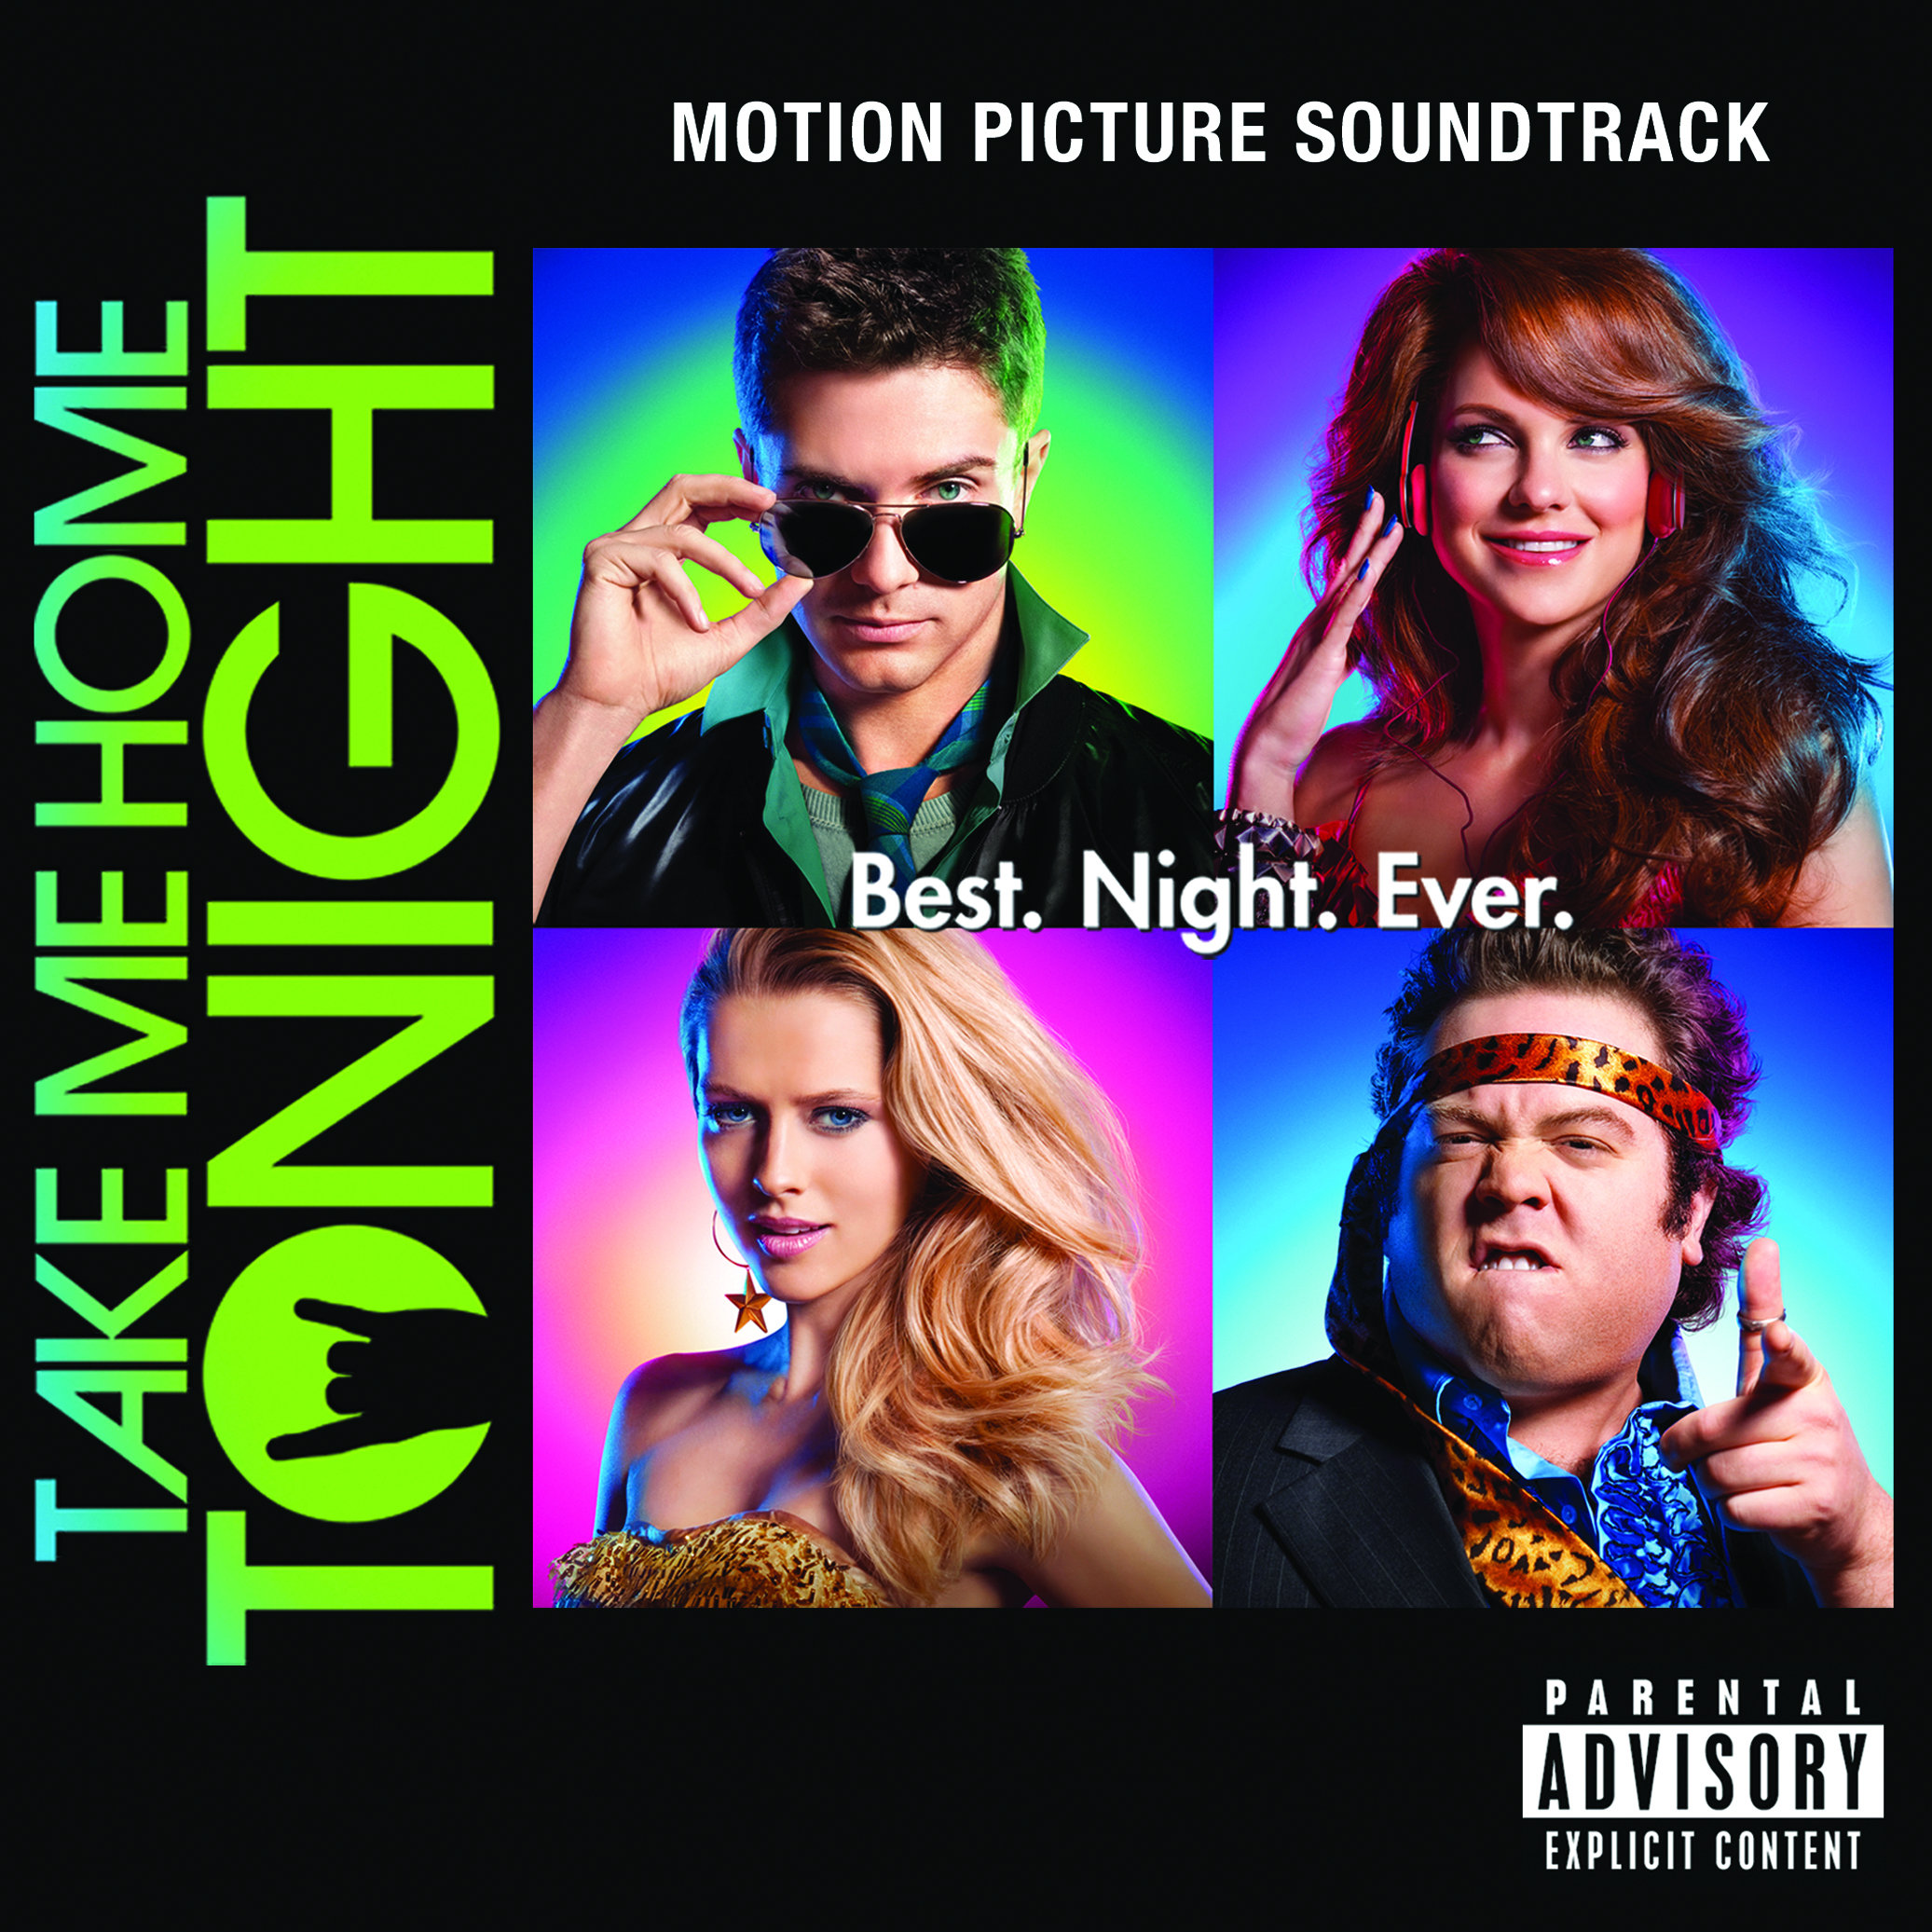 Take Me Home Tonight Motion Picture Soundtrack музыка из фильма